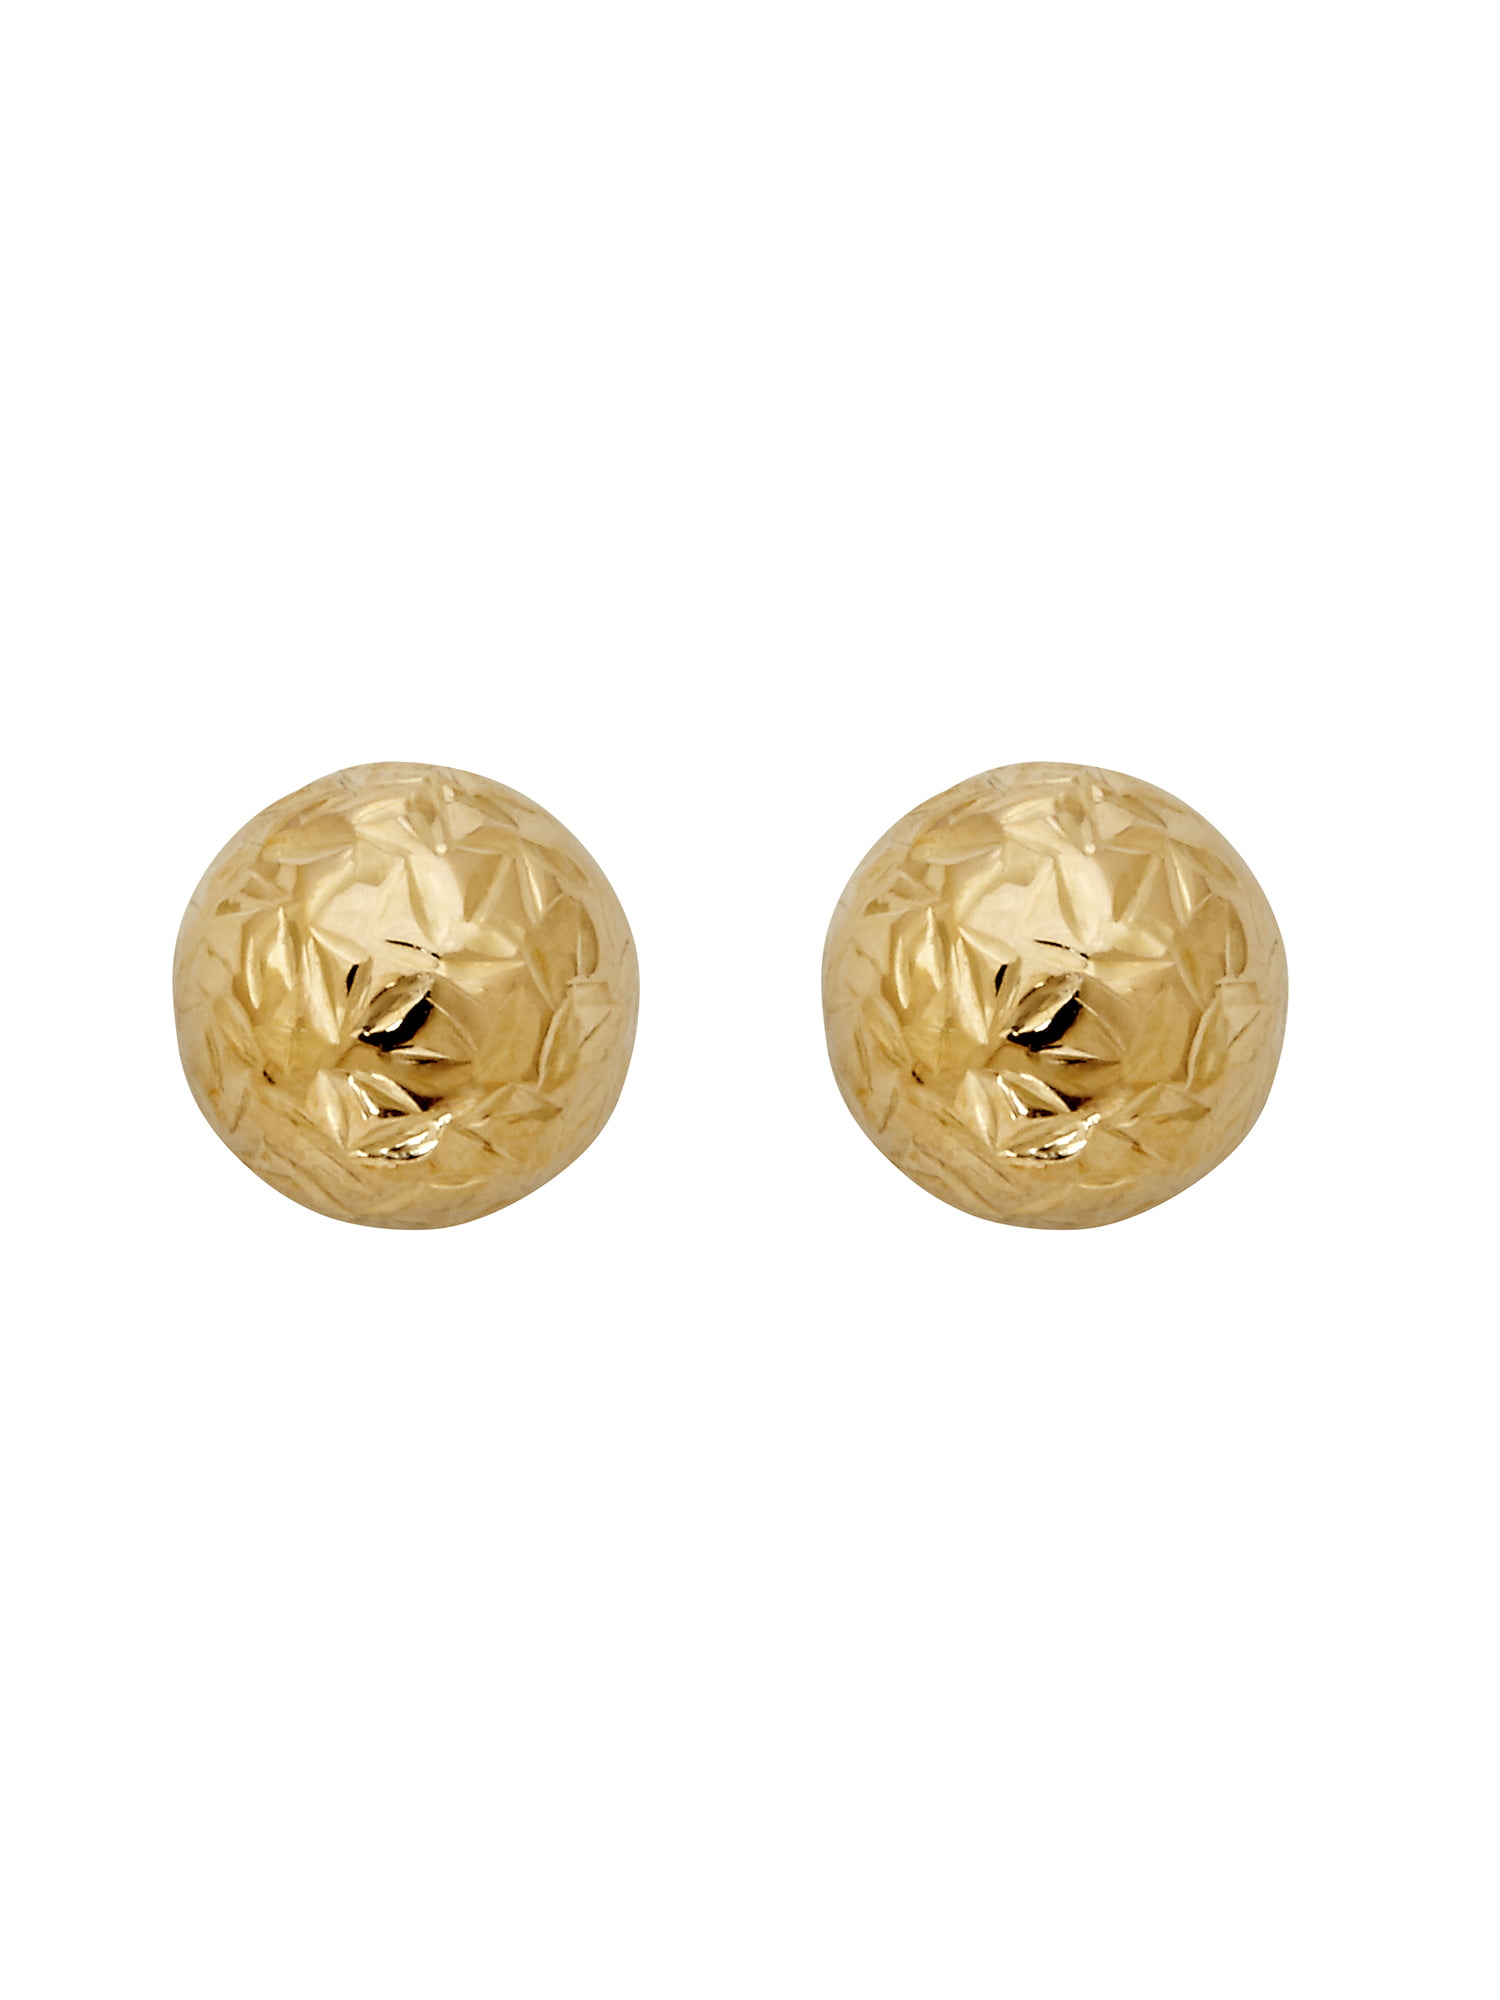 Brilliance Fine Jewelry 10K Yellow Gold 6MM Hollow Ball Studs Earrings